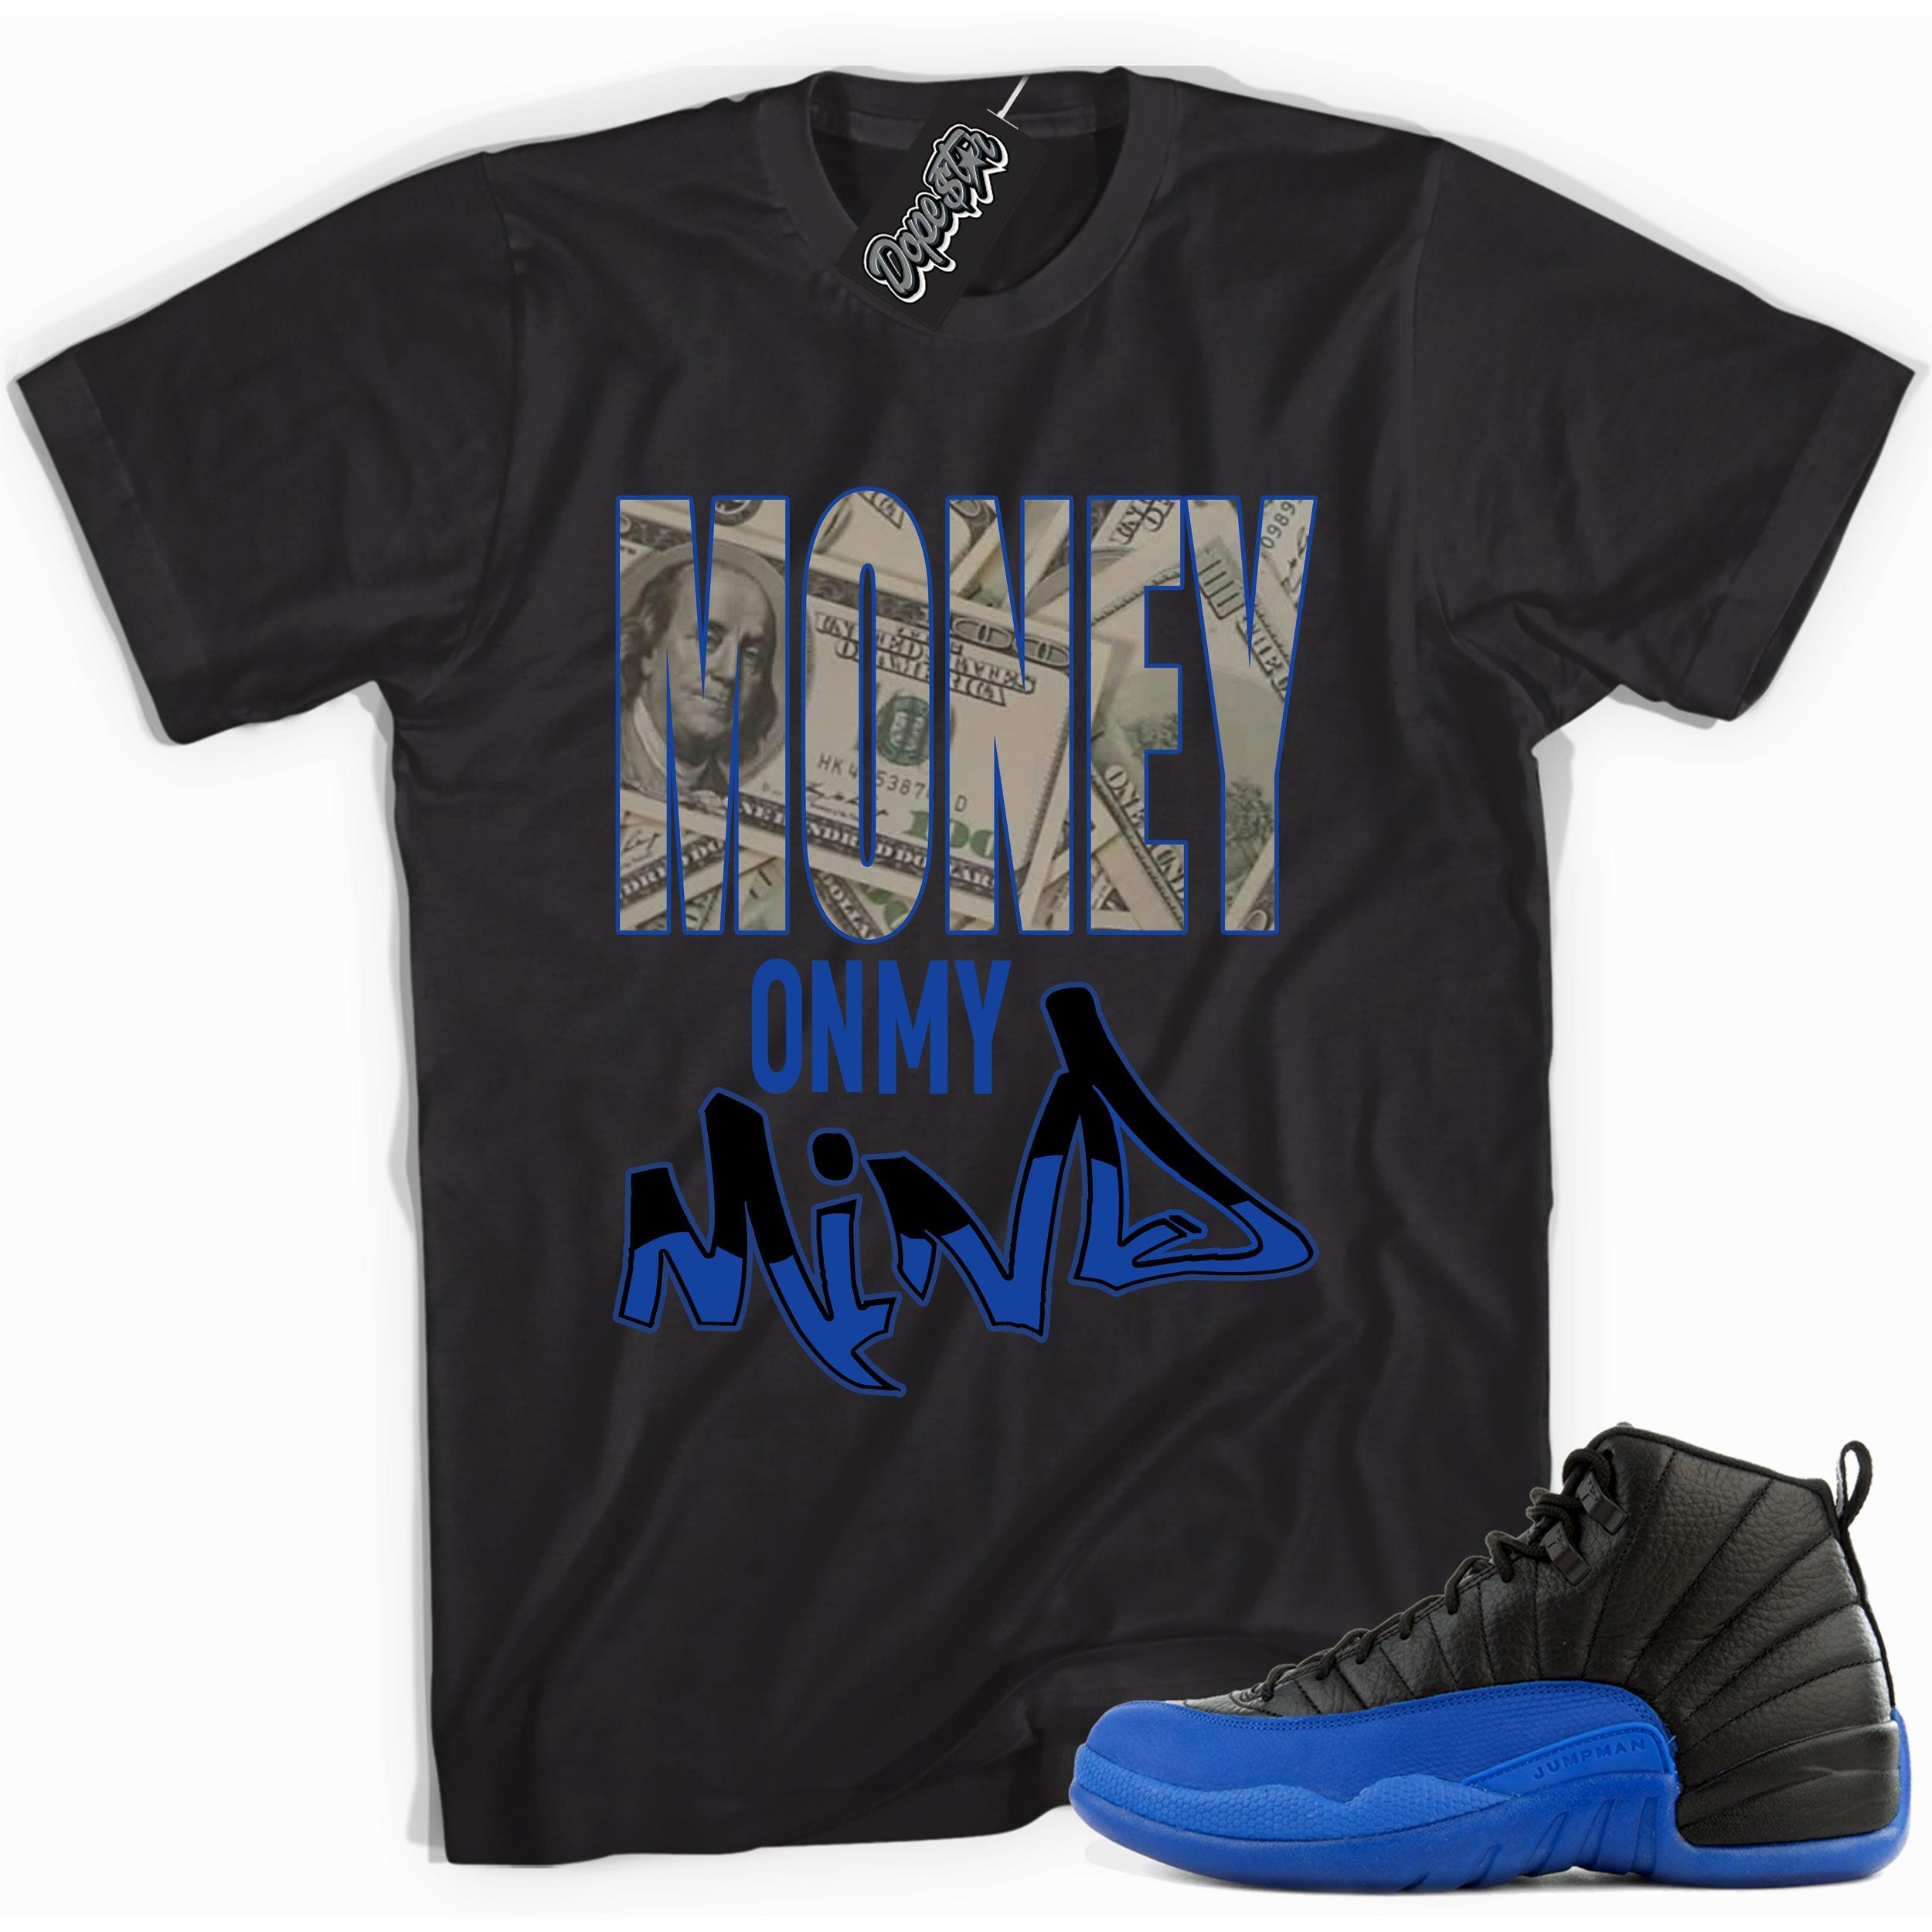 Cool black graphic tee with 'money on my mind' print, that perfectly matches  Air Jordan 12 Retro Black Game Royal sneakers.